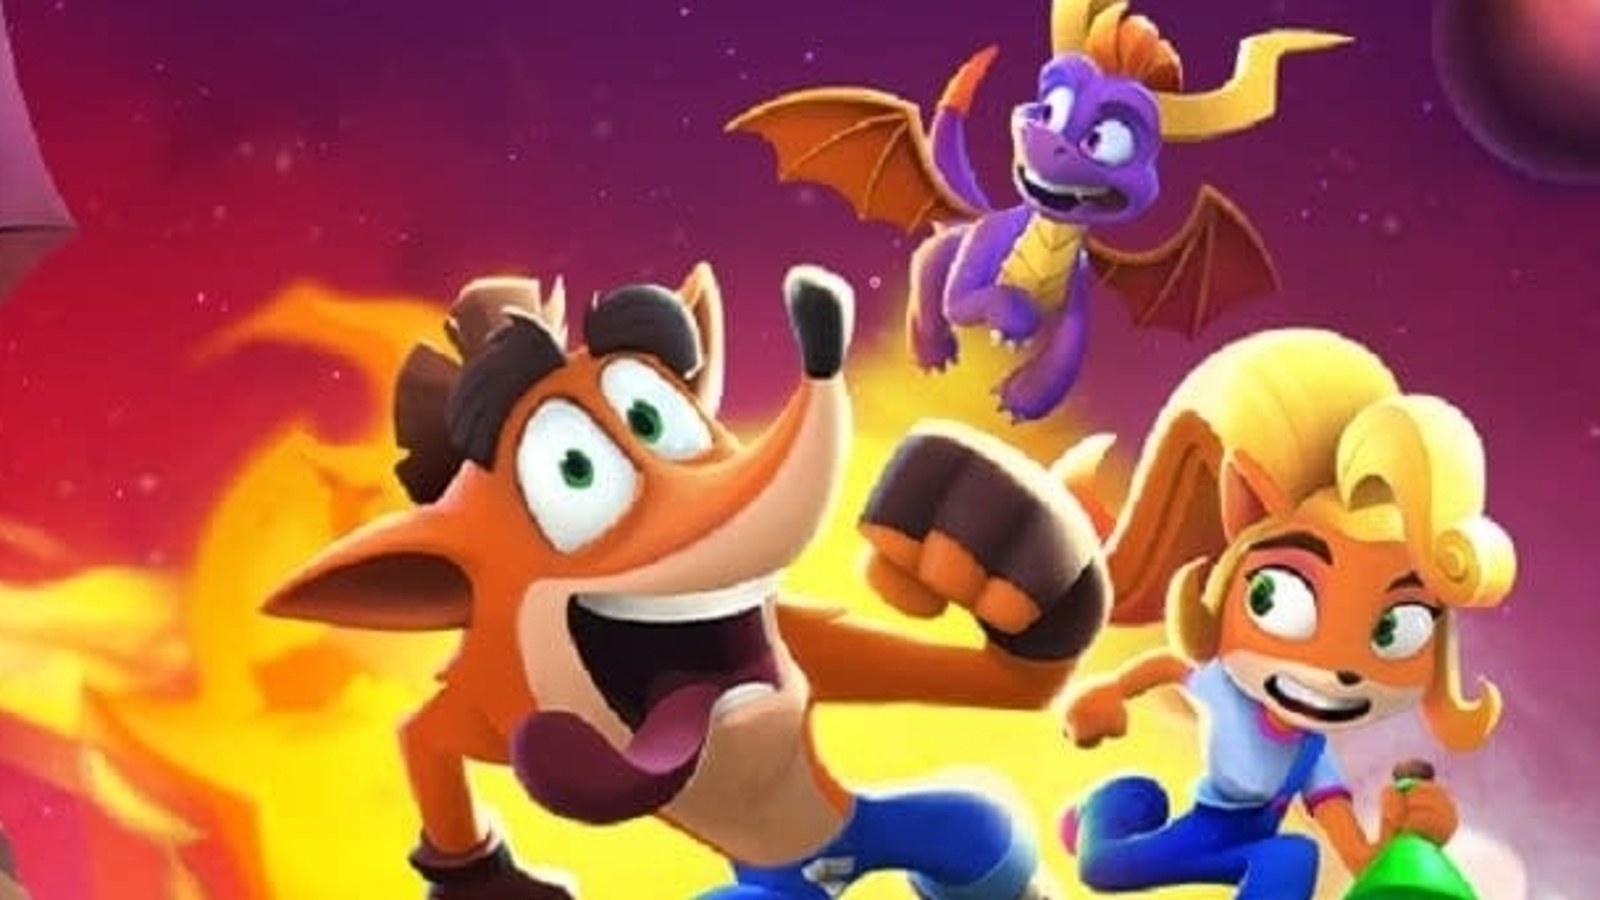 Crash Bandicoot mobile game shutting down after less than two years